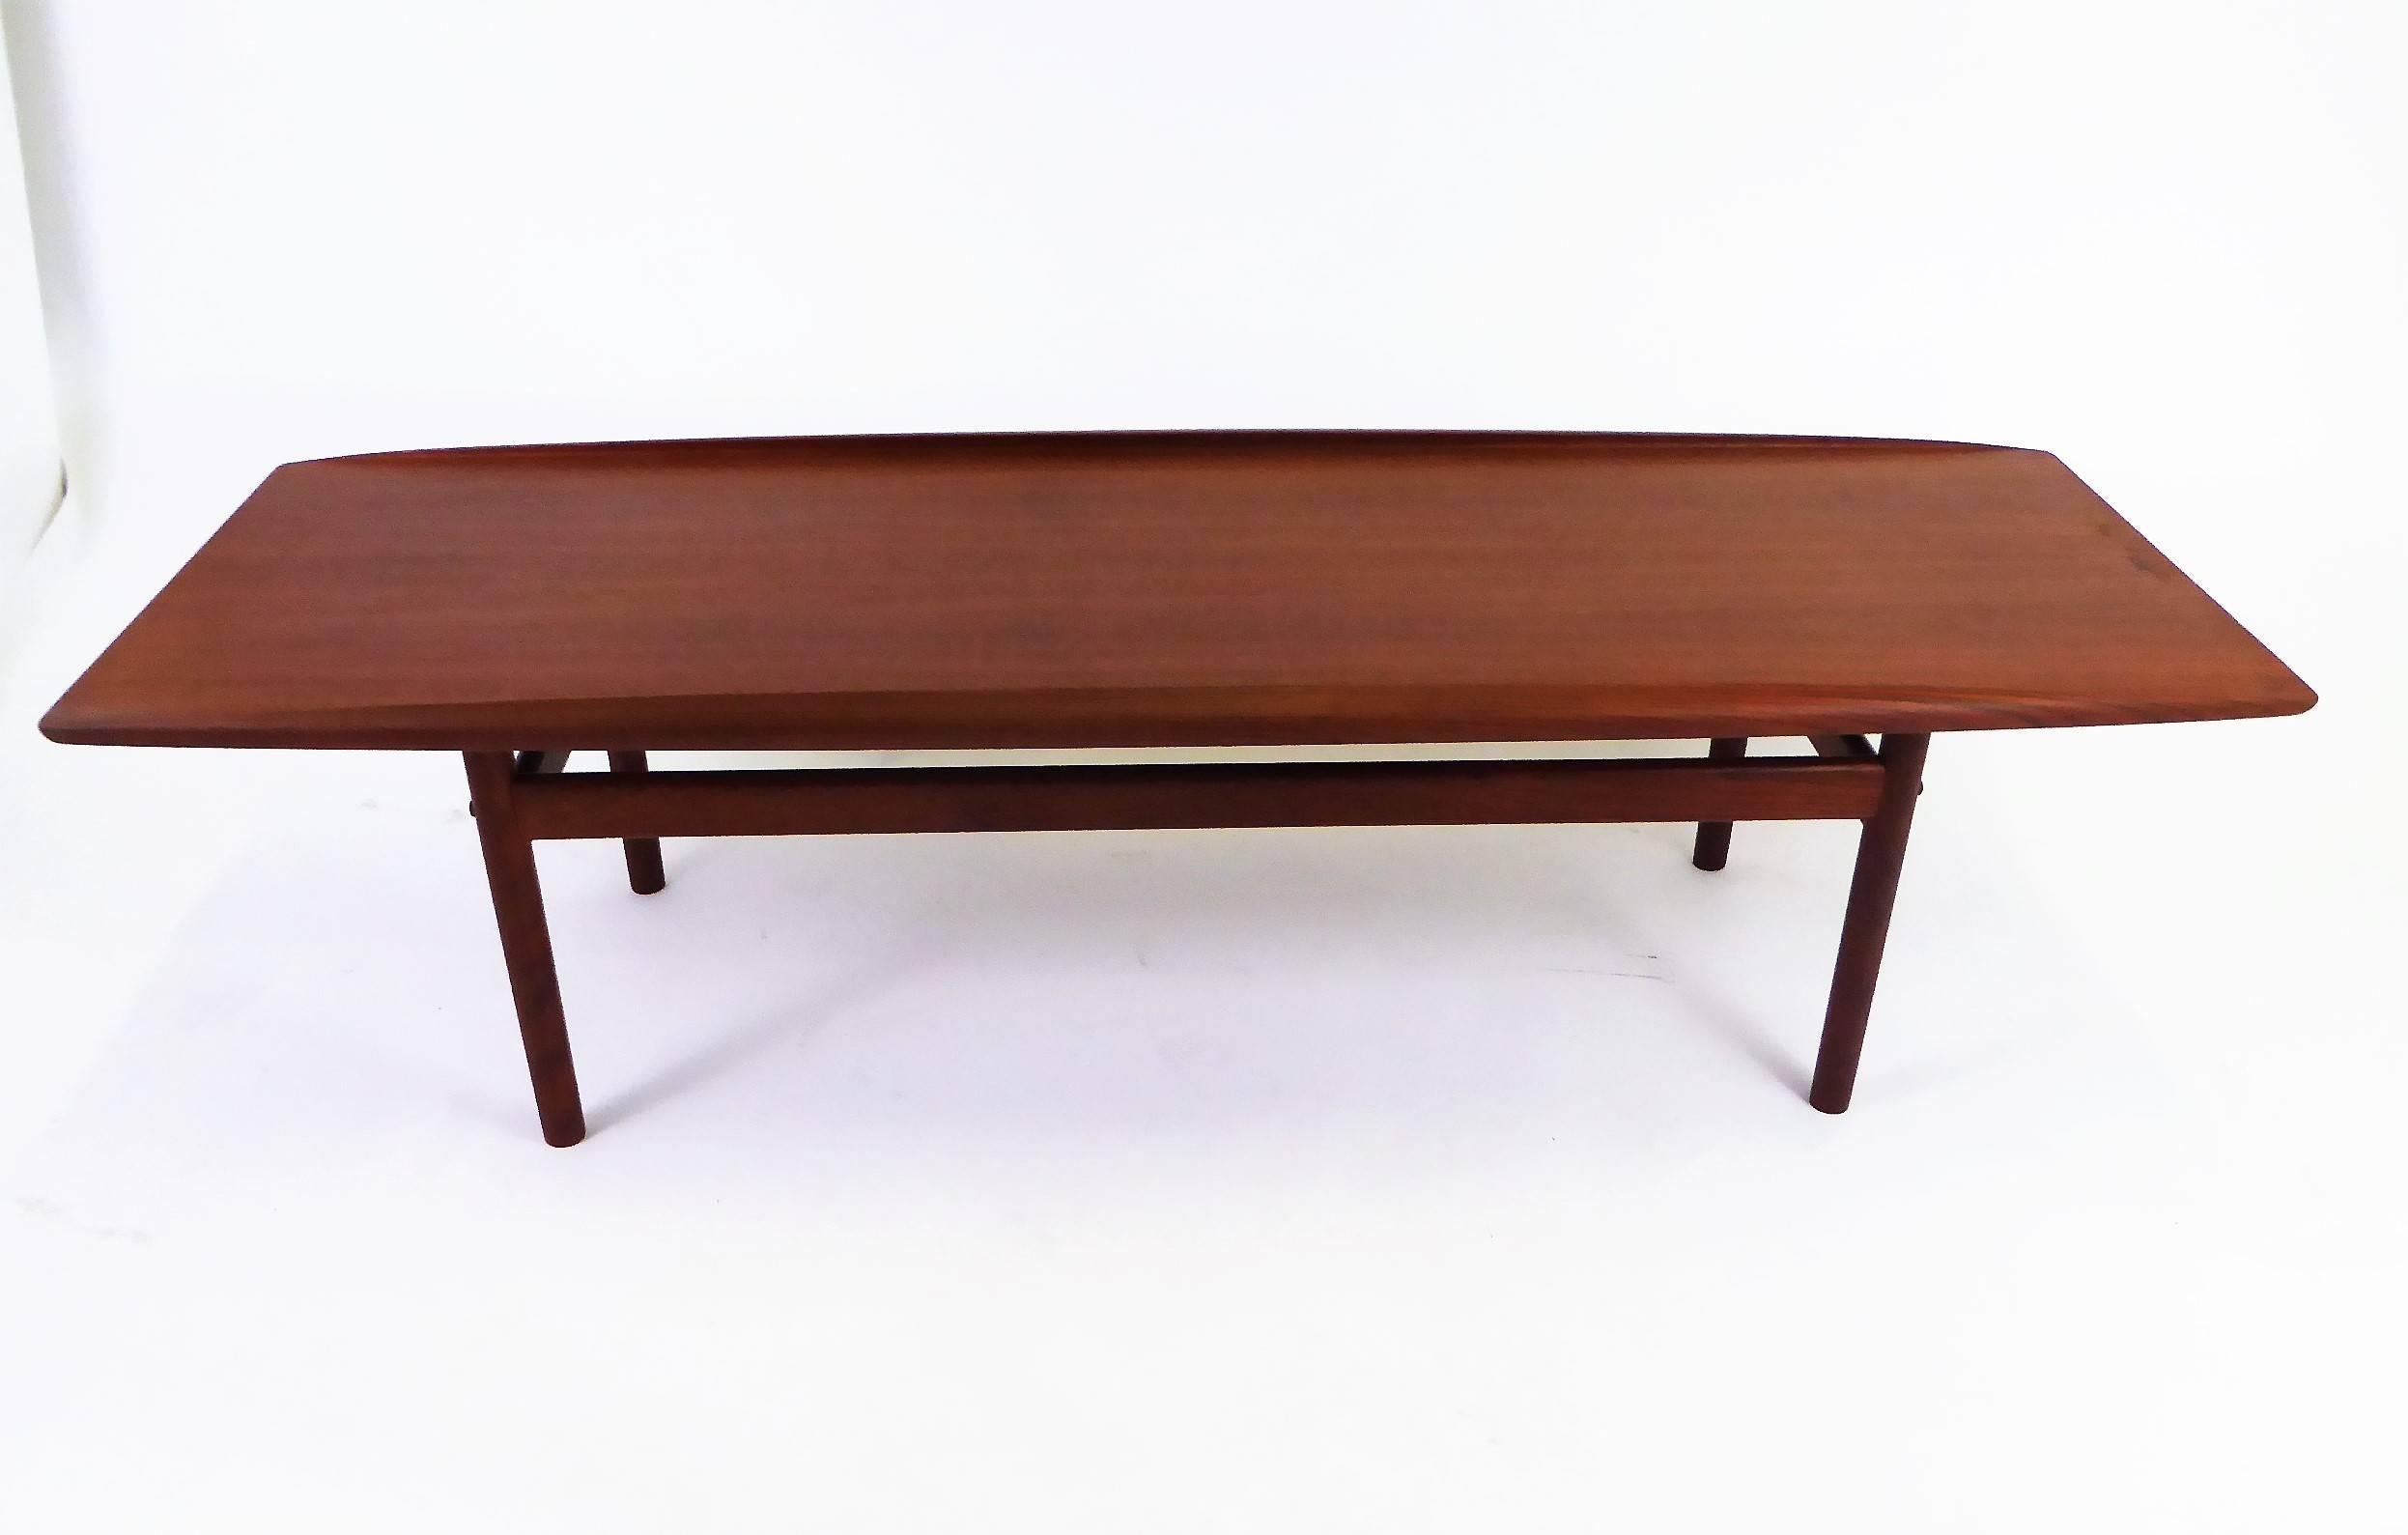 Exceptional 1960s Danish design by Grete Jalk for Poul Jeppesen. A surfboard coffee table in teak with sculpted edge form. With appropriate 1960s Jalk/Jeppesen labels, the table is without issues. One off colored spot on one end (see